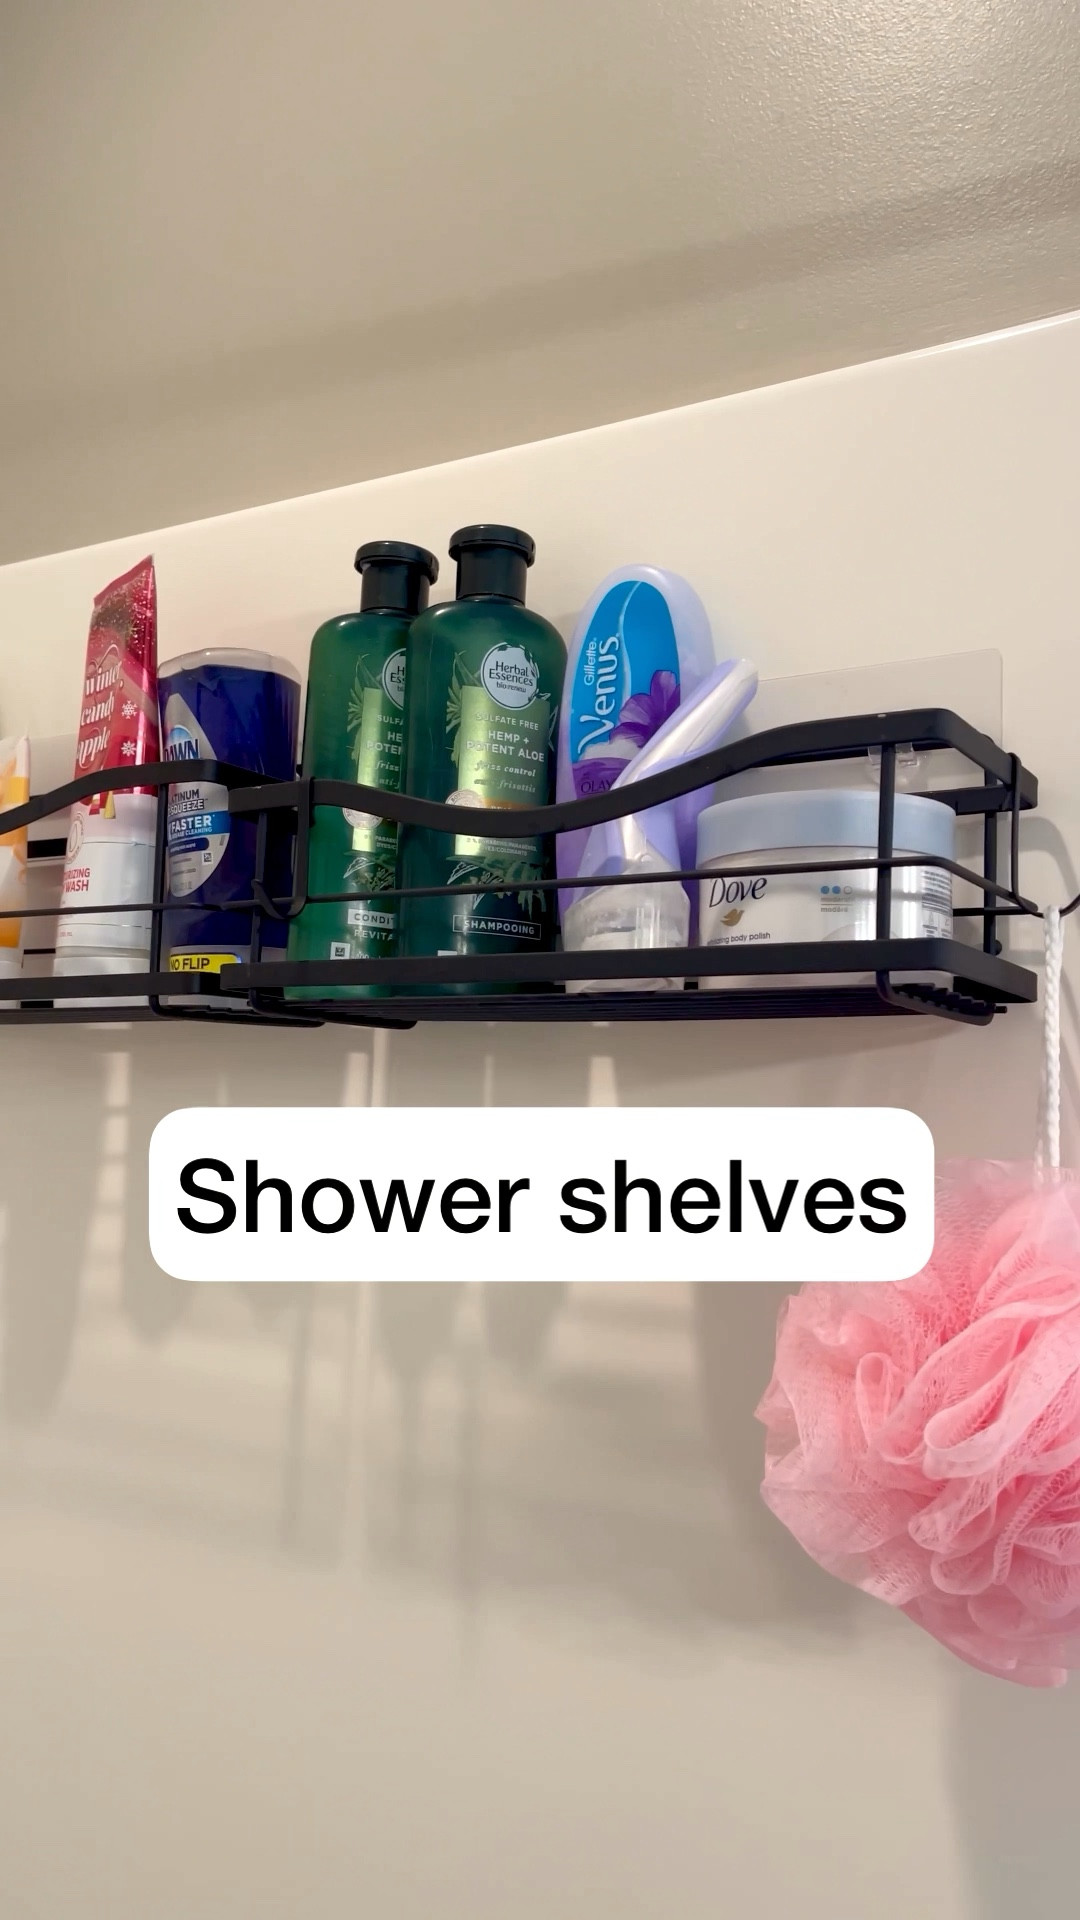 Shoppers Love Organizing With the Kincmax Shower Caddy